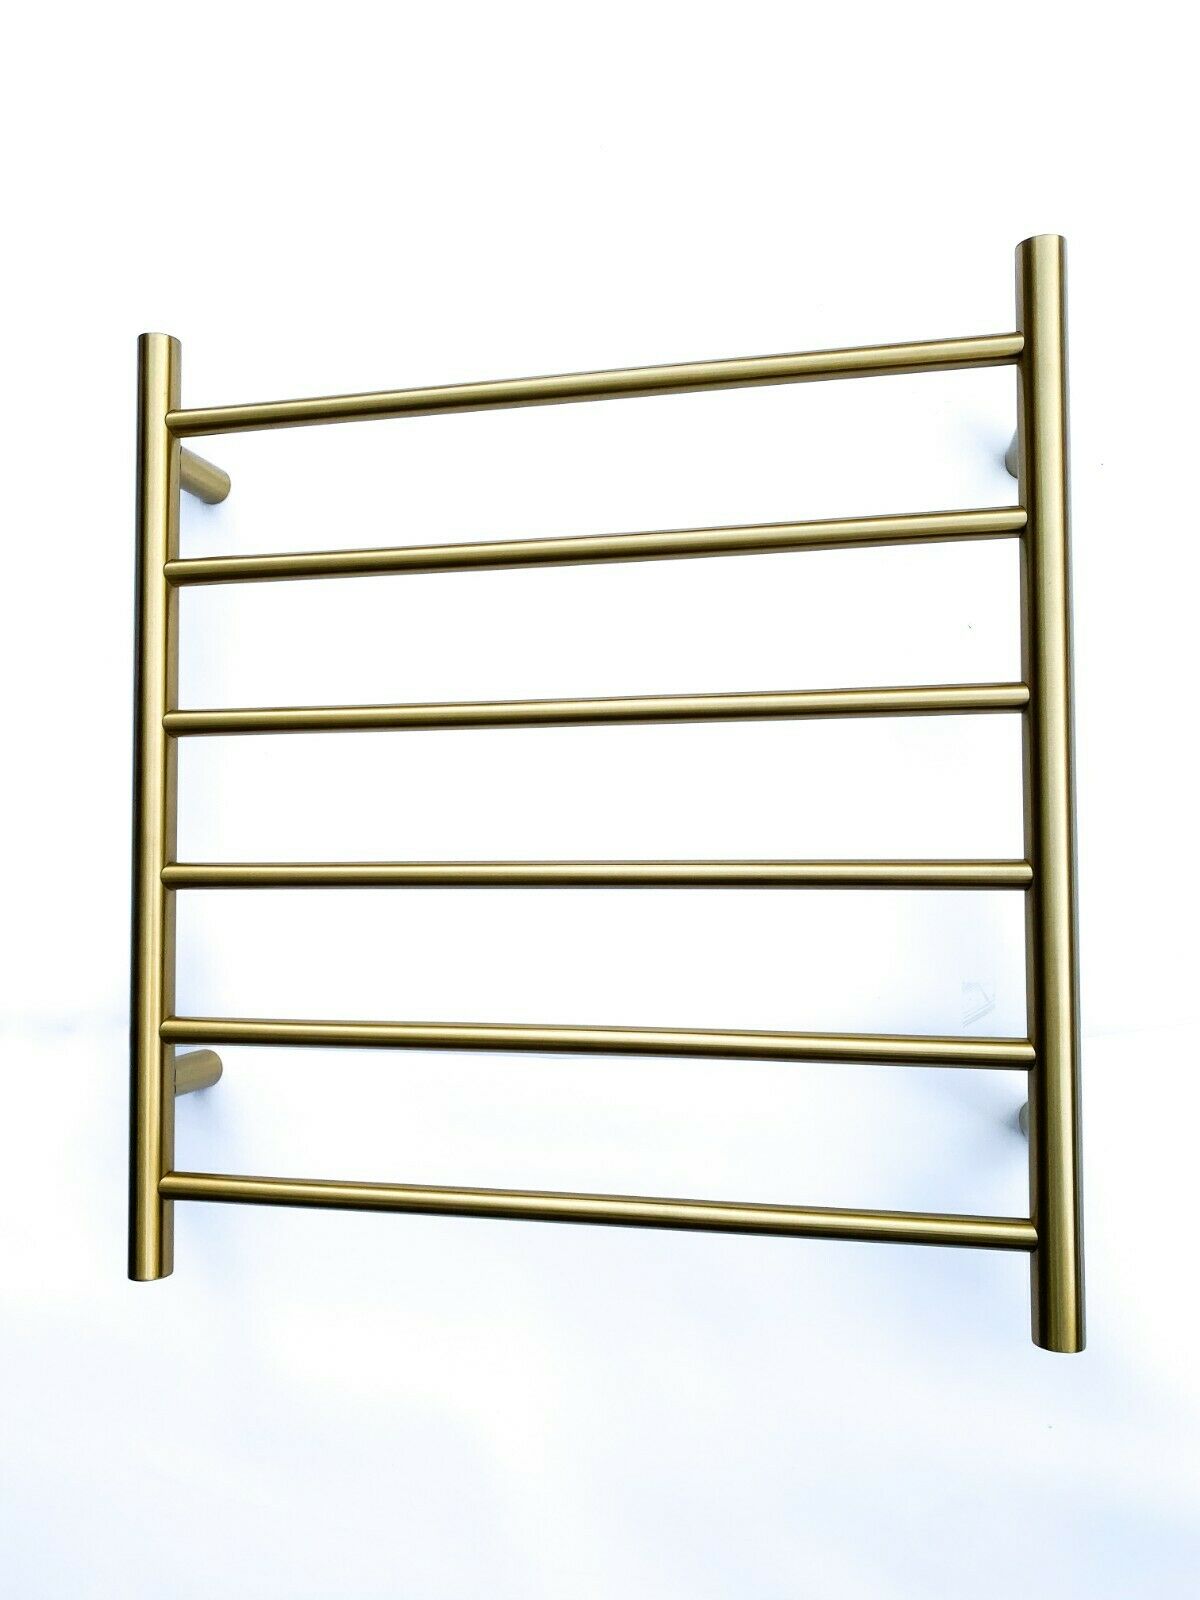 Burnished brass Brushed Gold Non Heated Towel Rail rack round 650 mm wide 6 bar